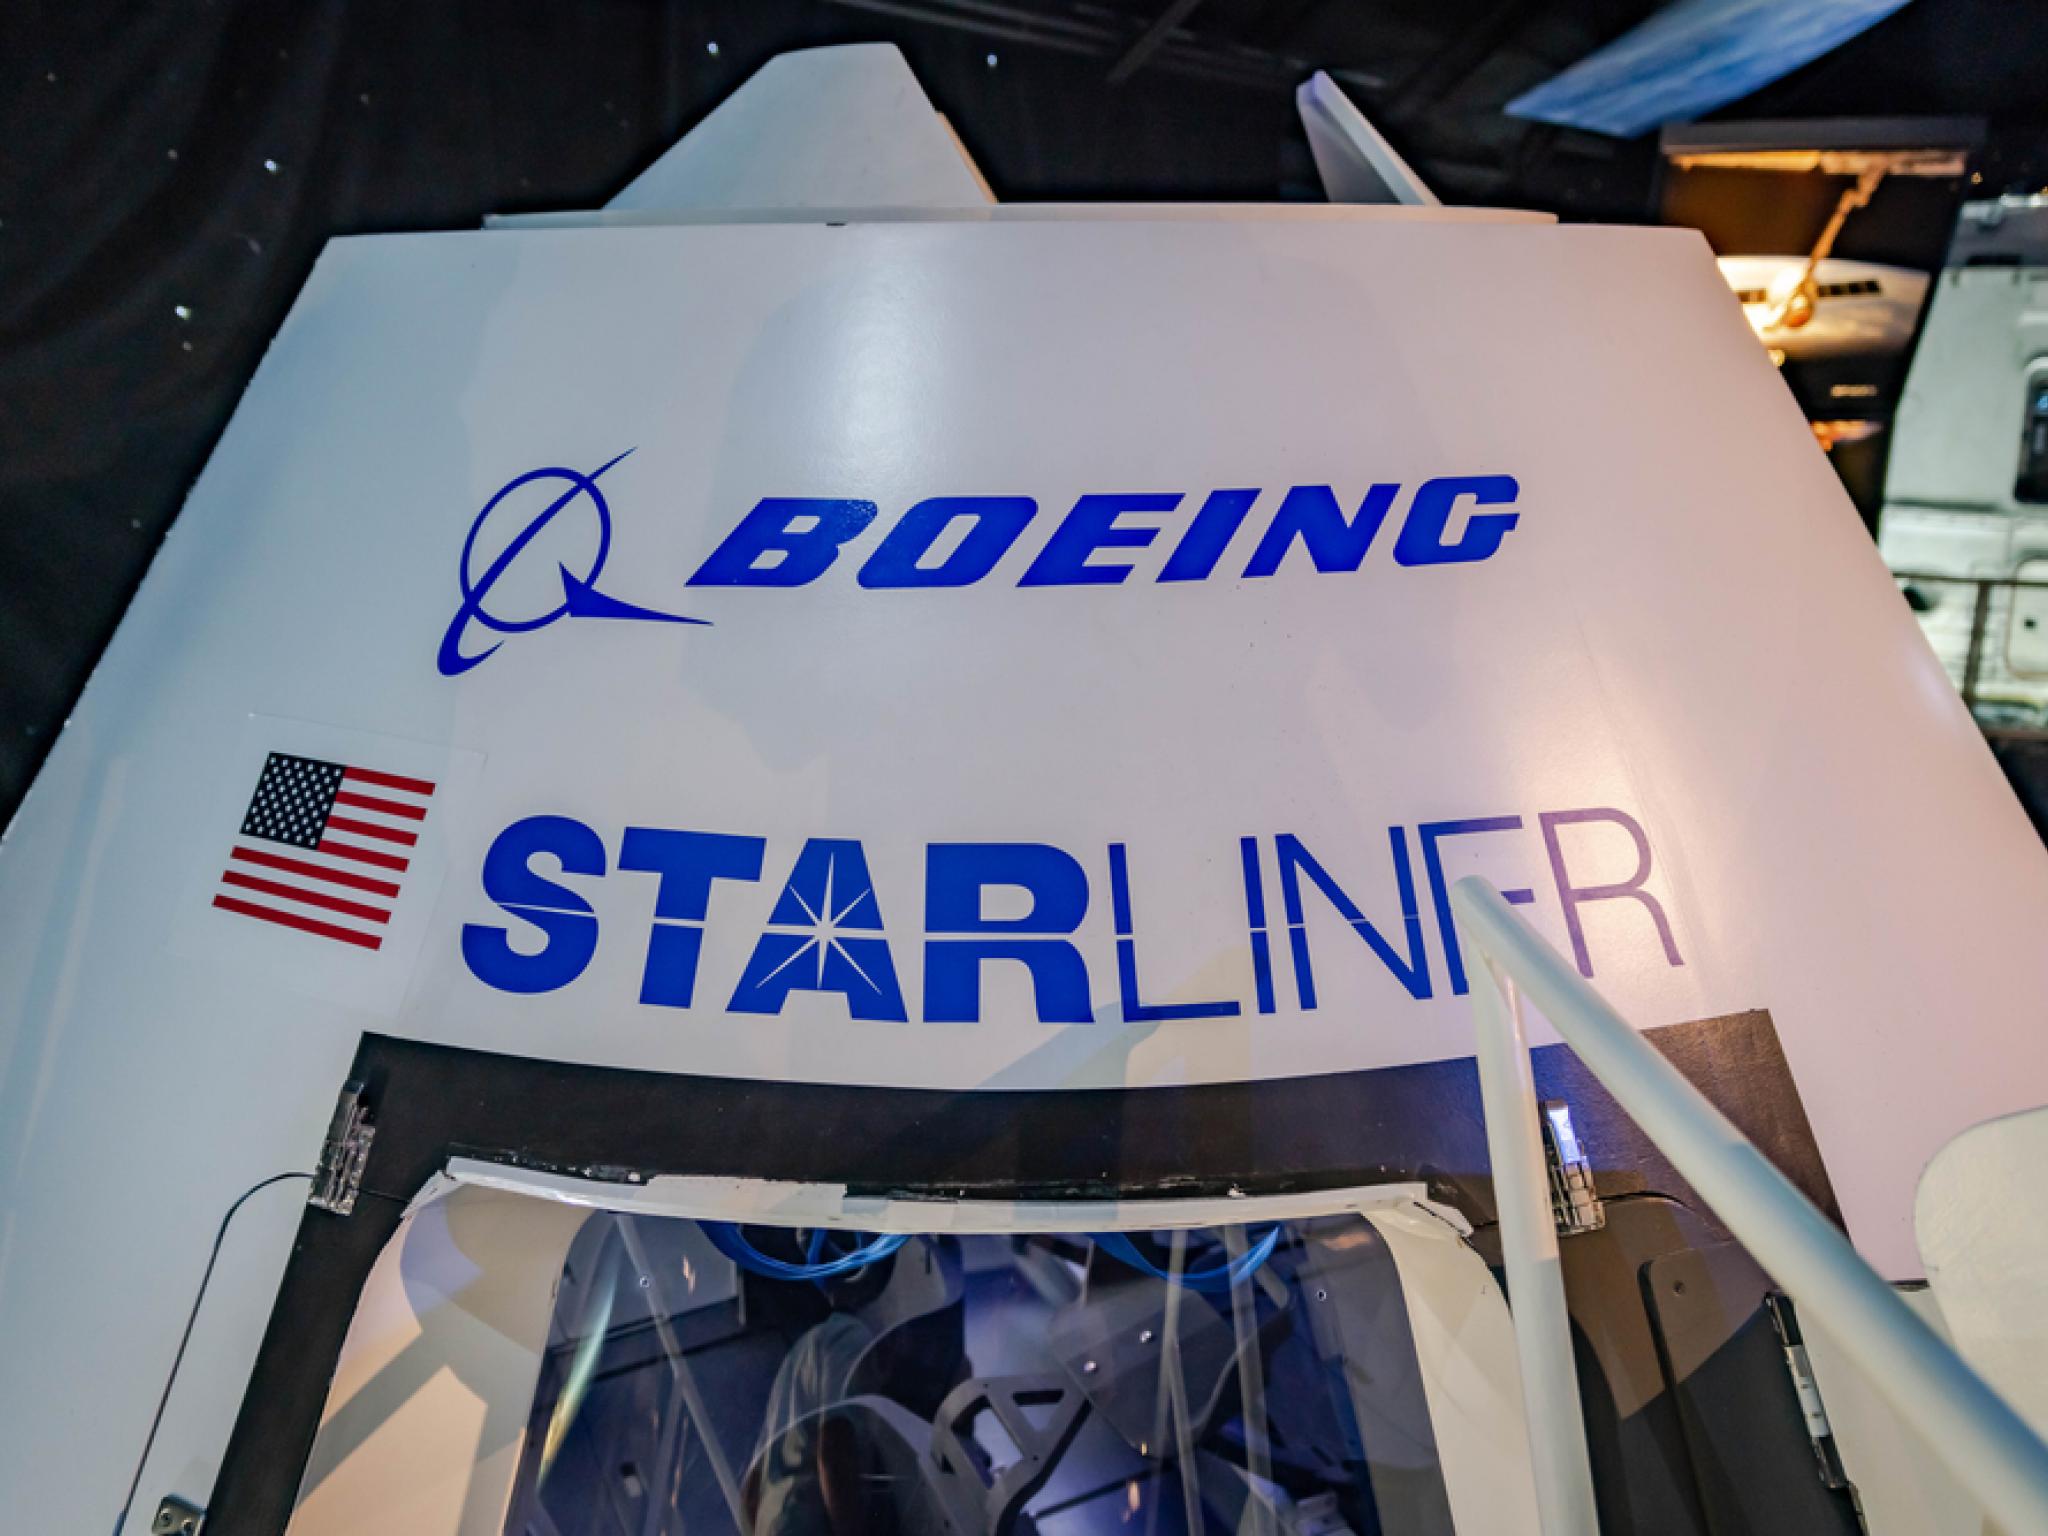  boeing-starliner-delays-continue-crewed-flight-test-to-occur-no-earlier-than-may-17-says-nasa 